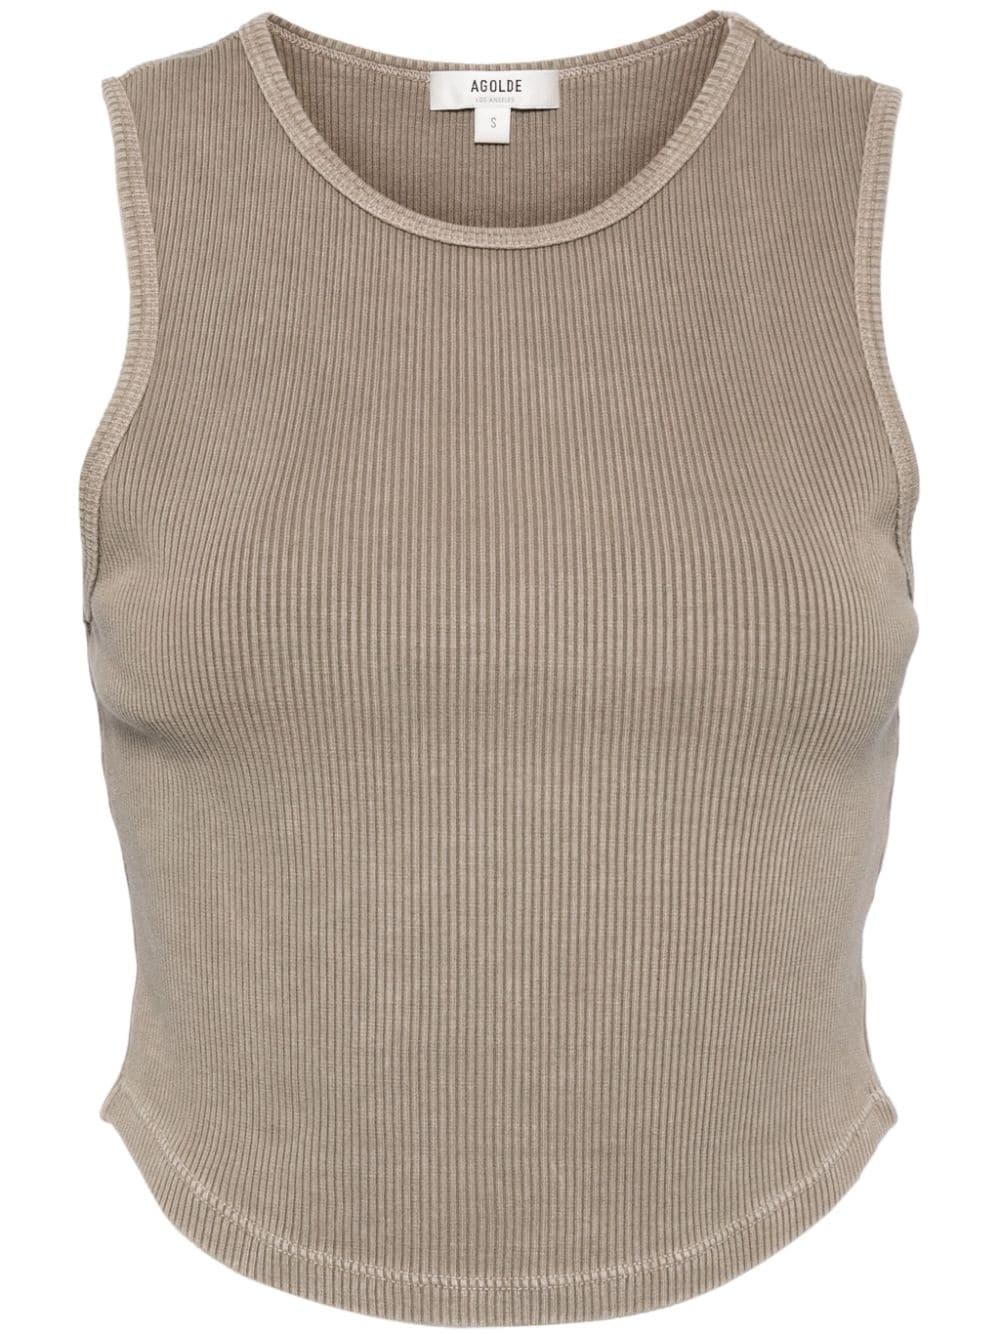 AGOLDE ribbed-knit tank top Beige